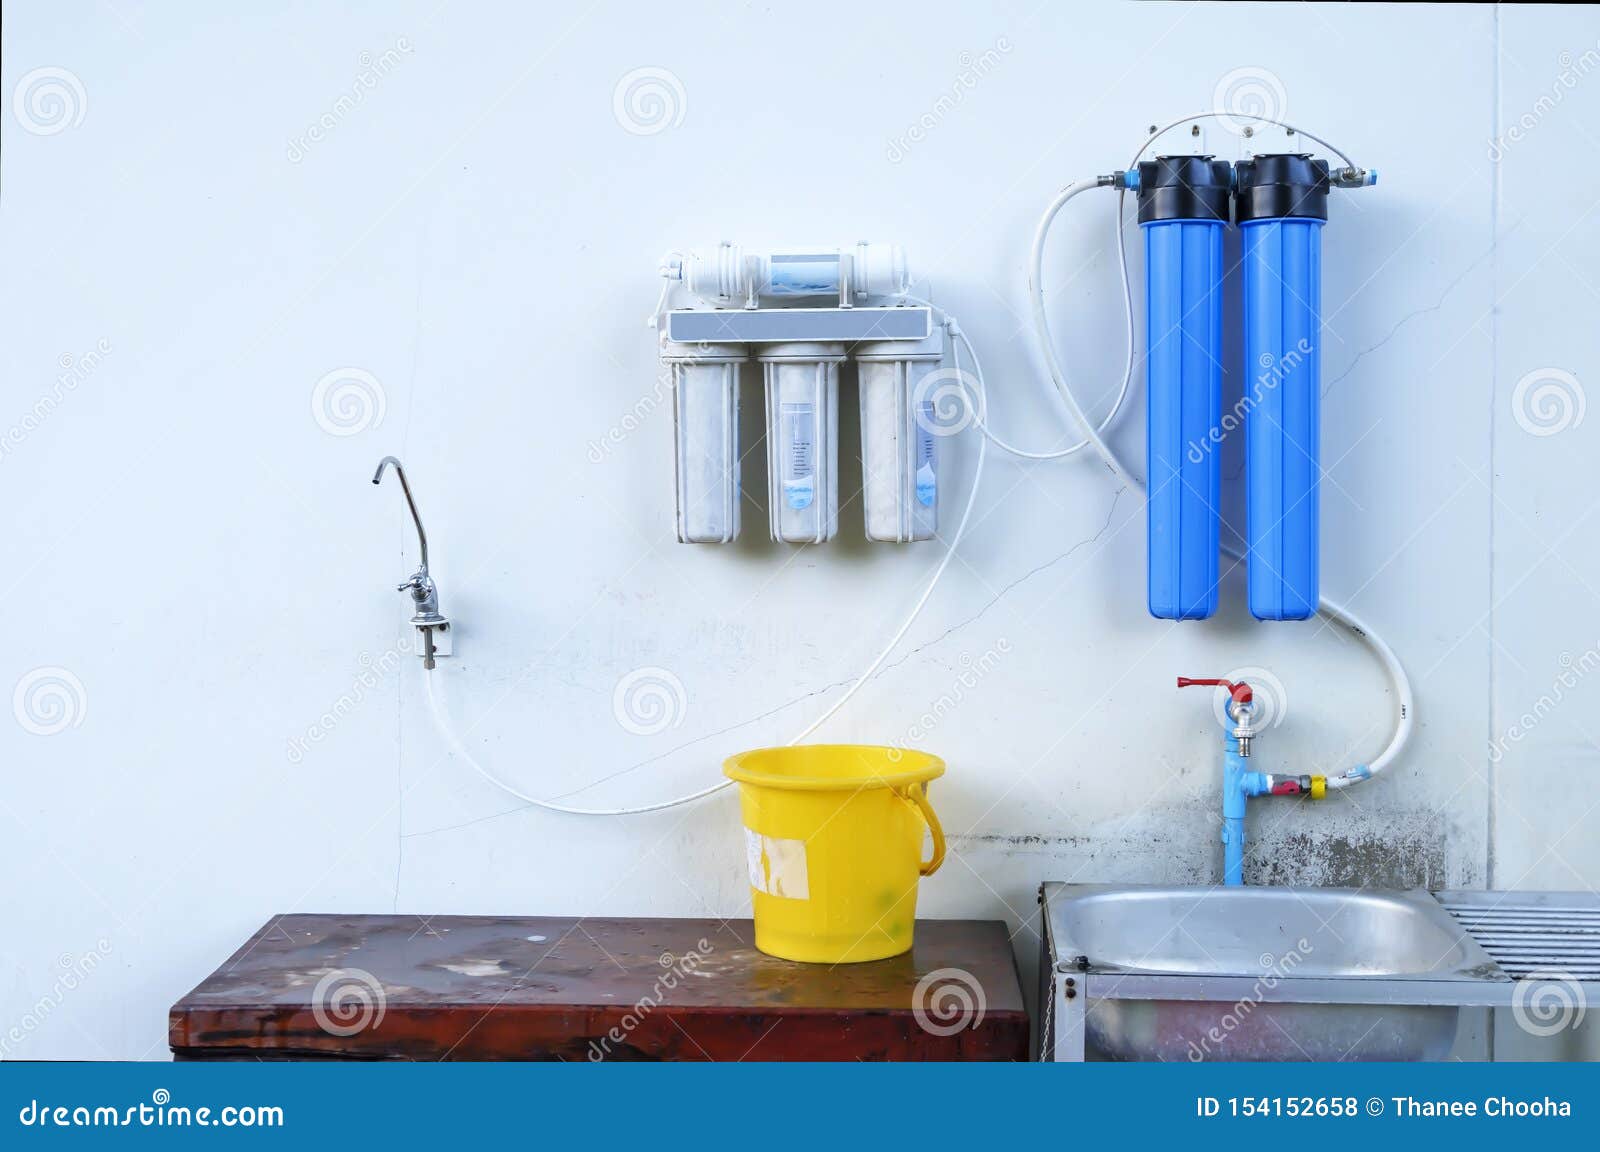 great filters to purify your drinking water an image in the kitchen interior